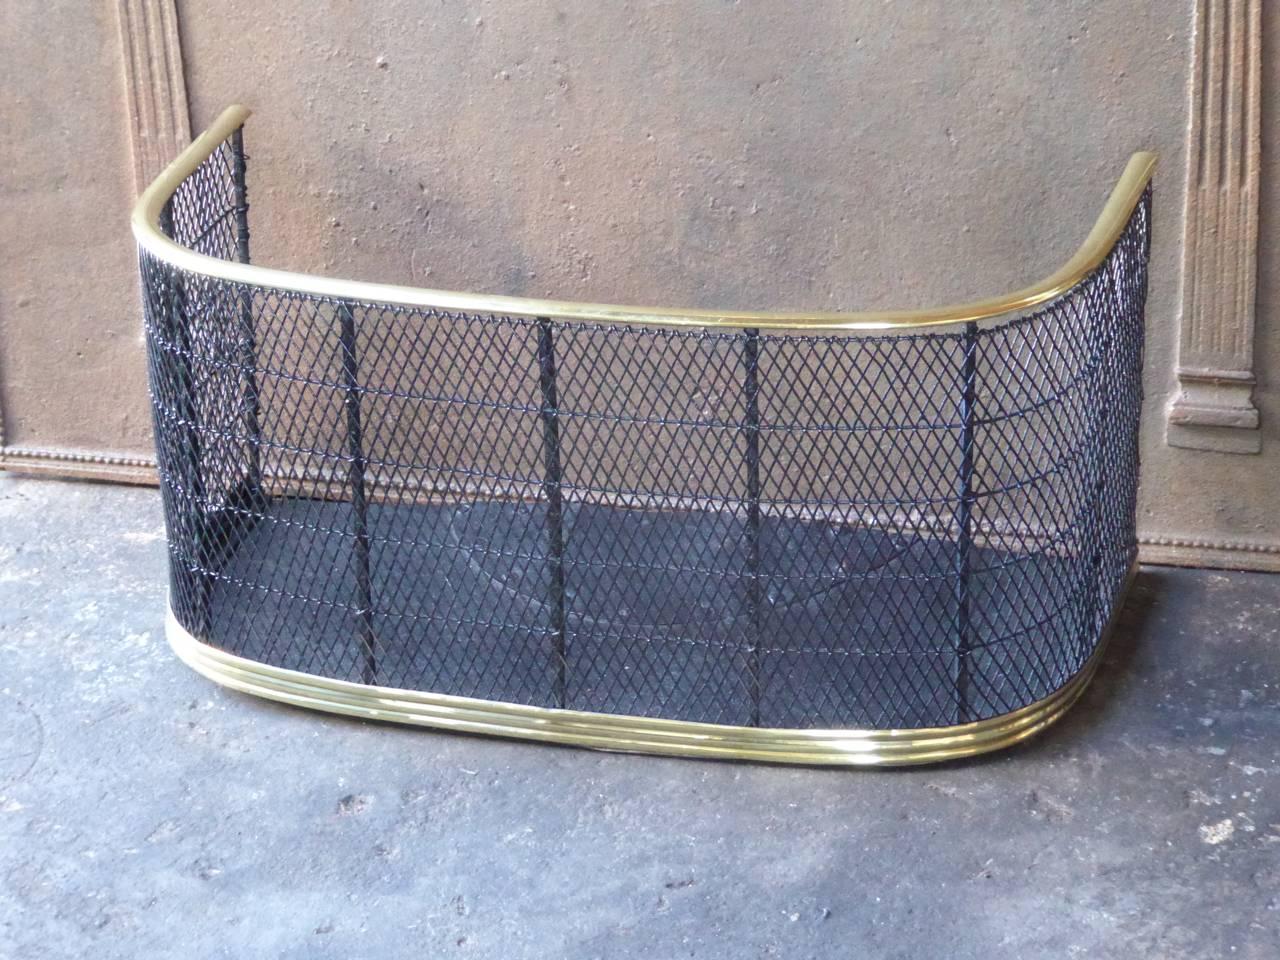 19th century English fireplace guard, fire screen made of polished brass, iron and iron mesh.